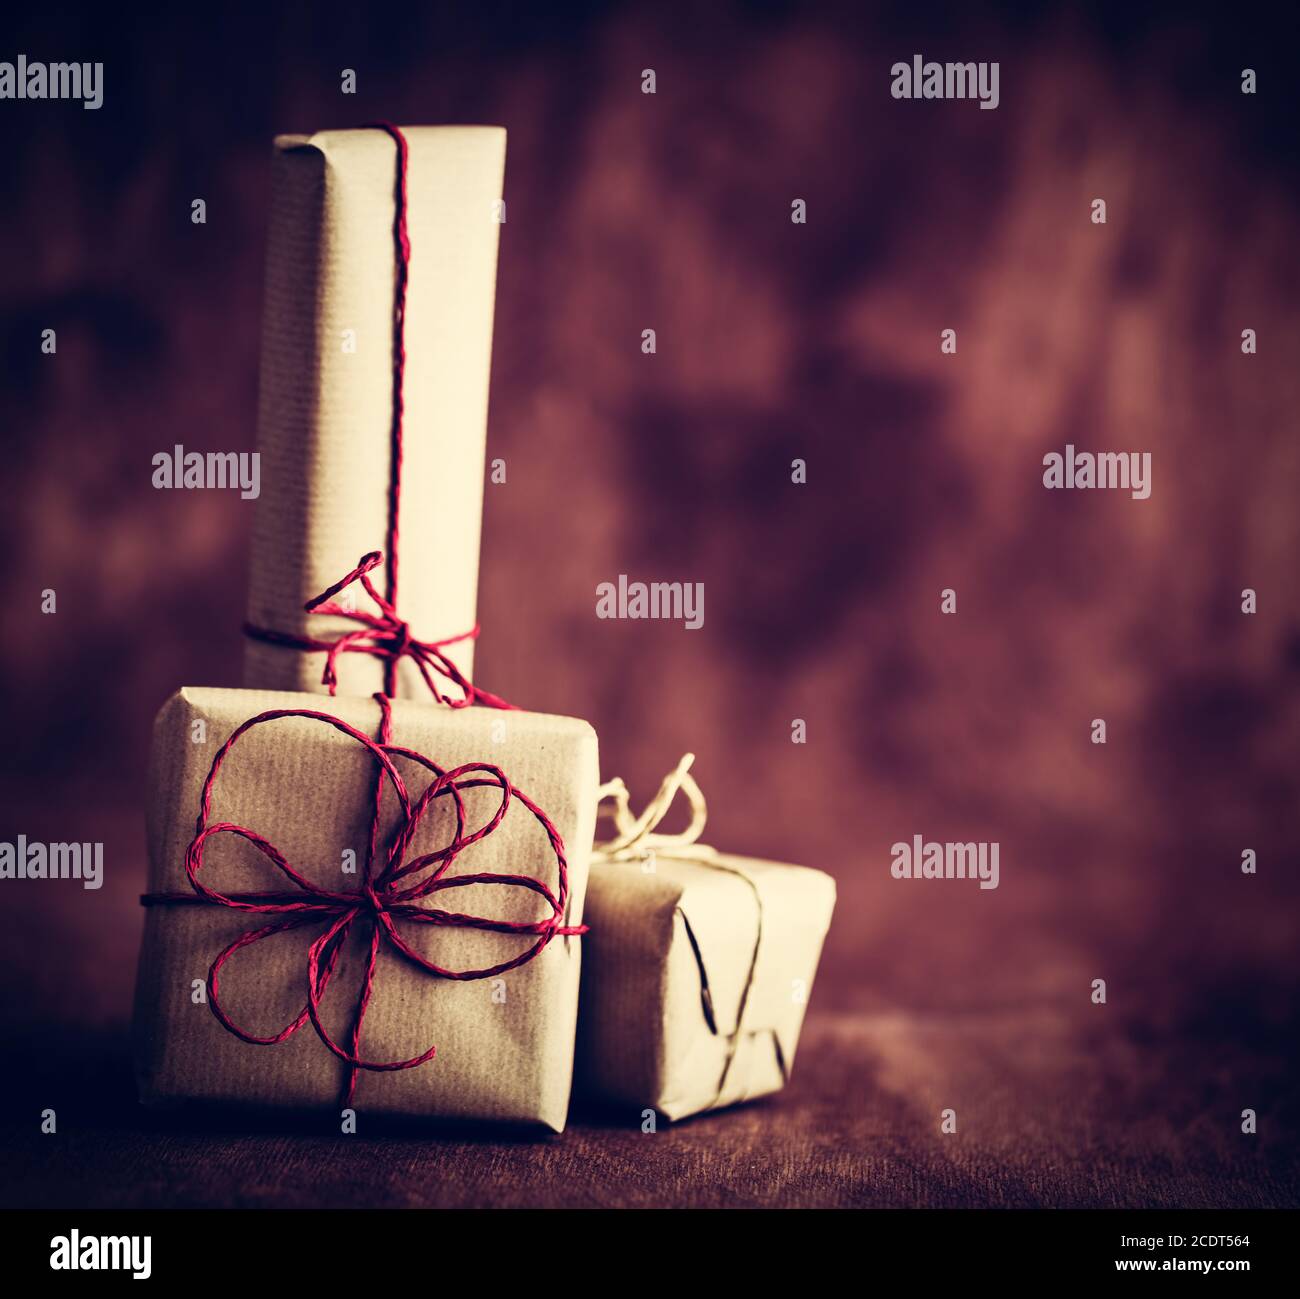 Rustic retro gifts, present boxes on wooden background. Christmas time Stock Photo